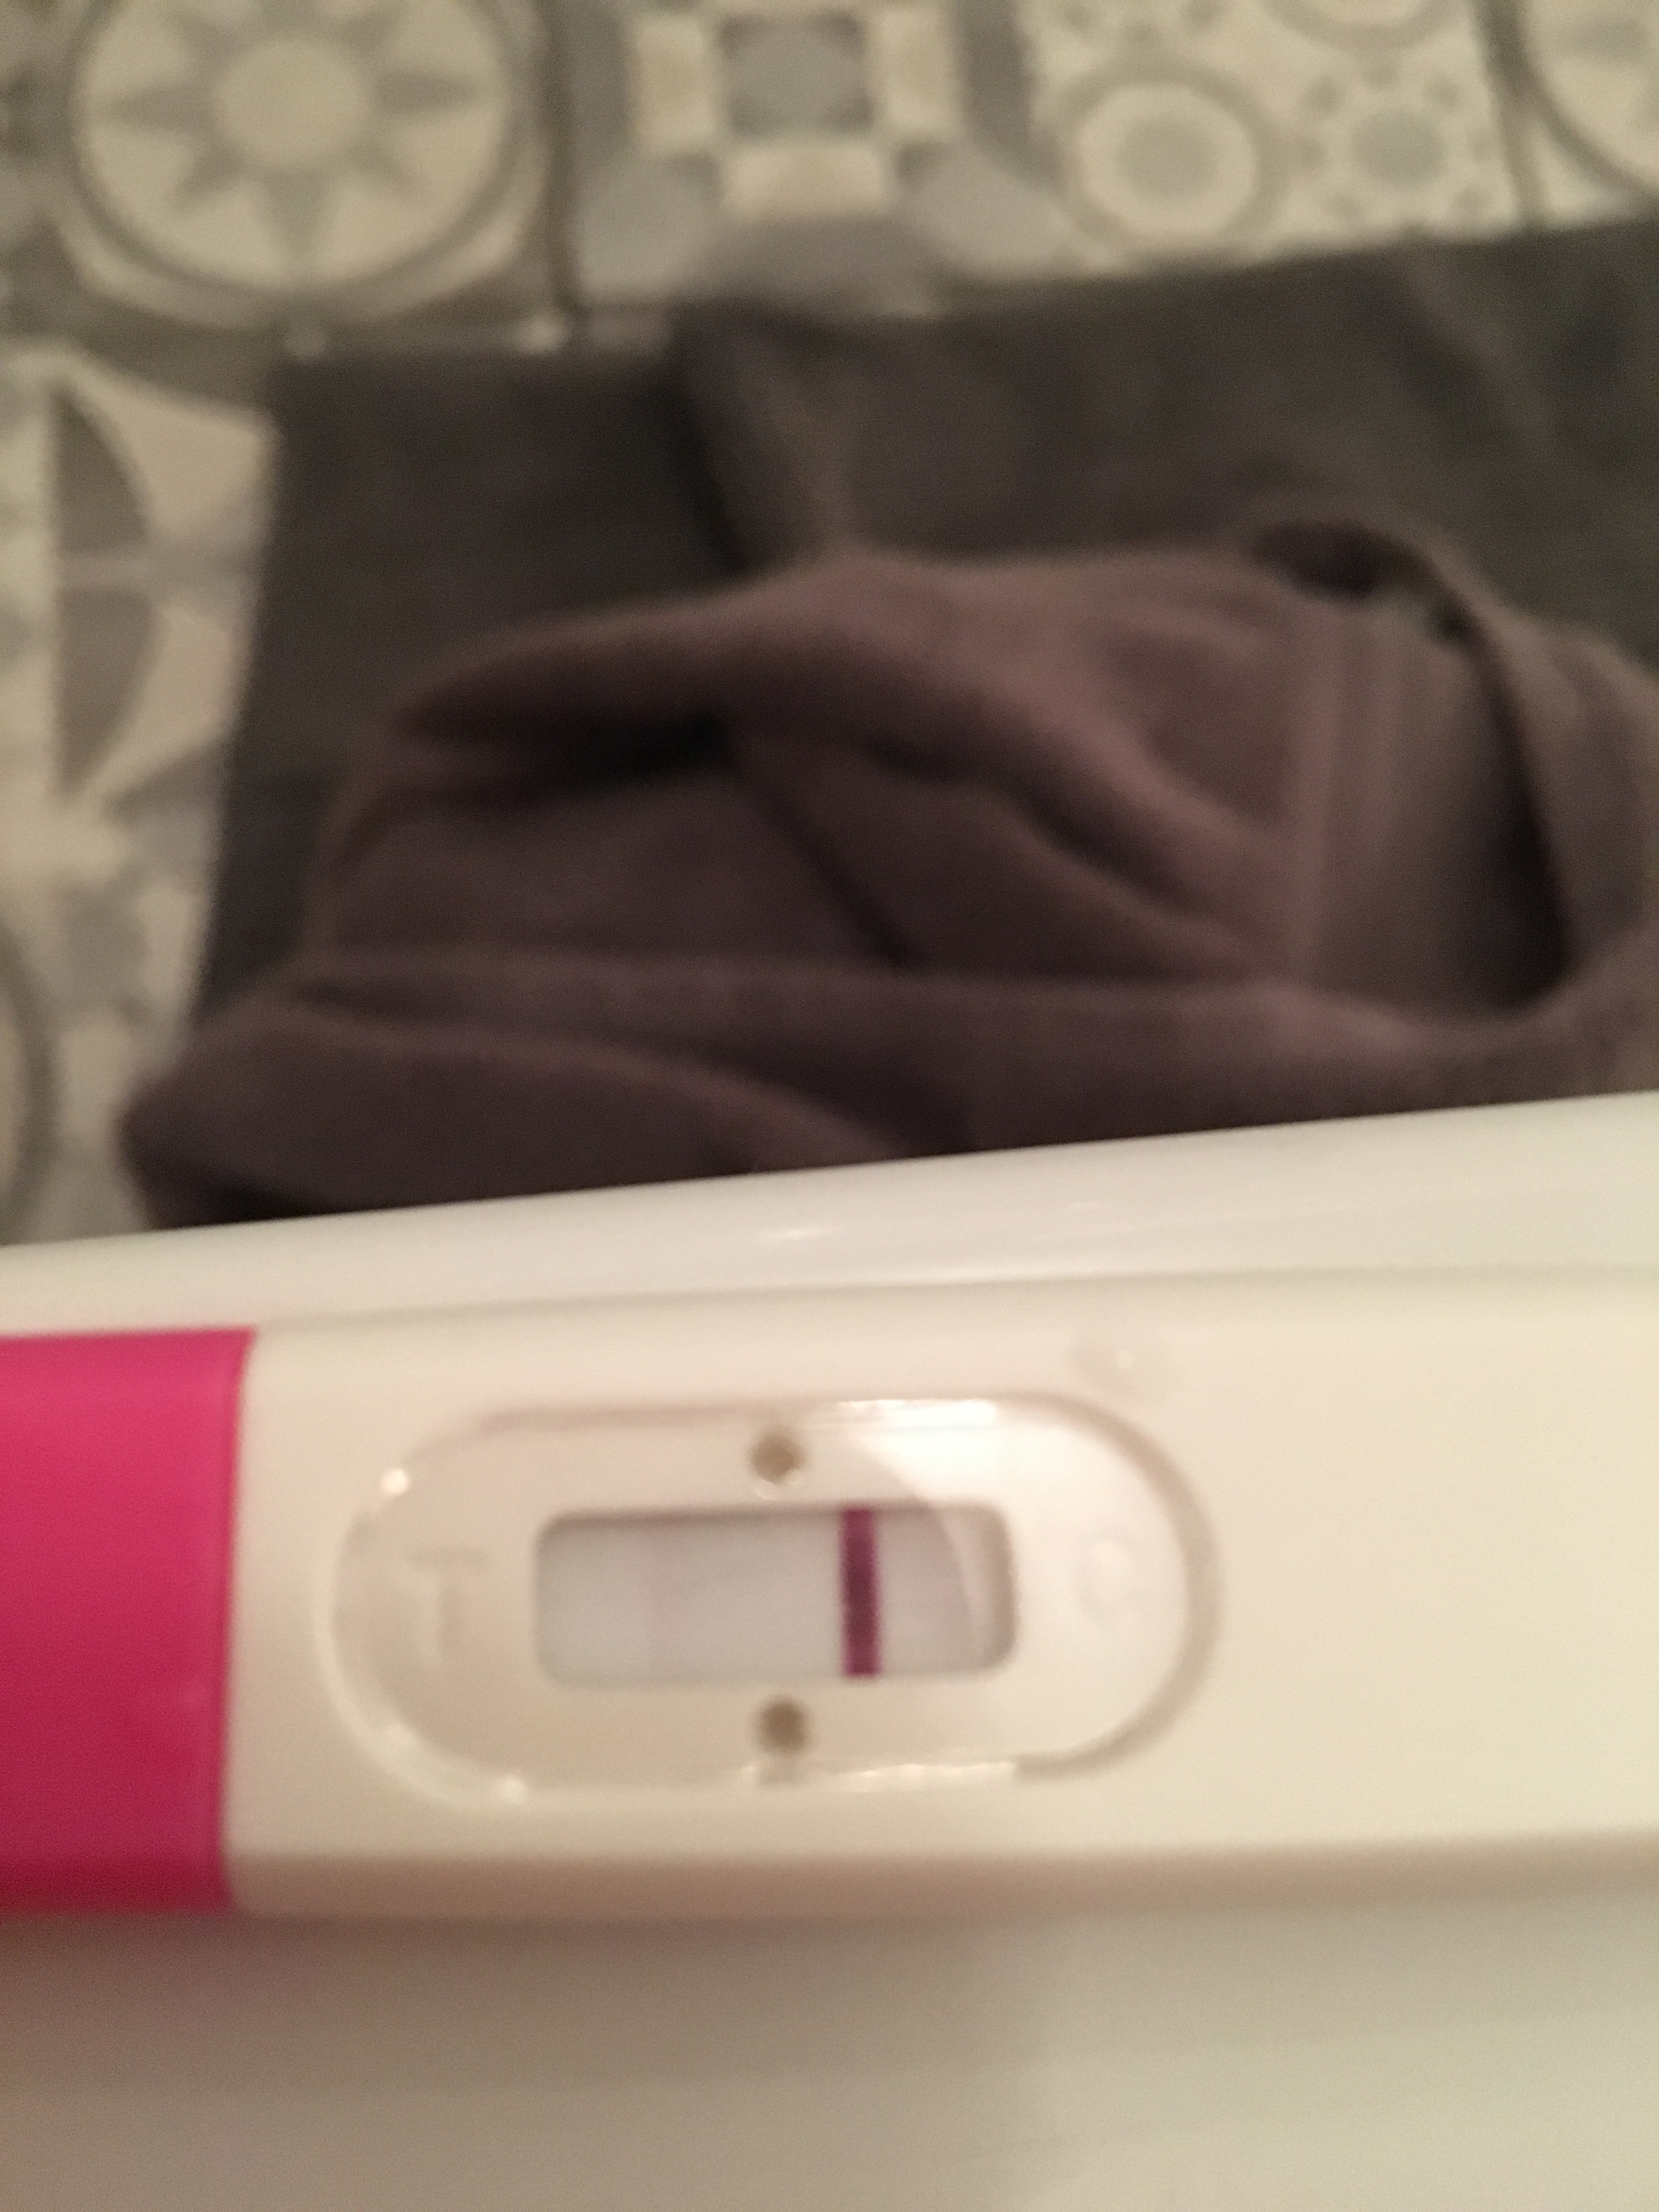 5 Days Before Missed Period Pregnancy Test